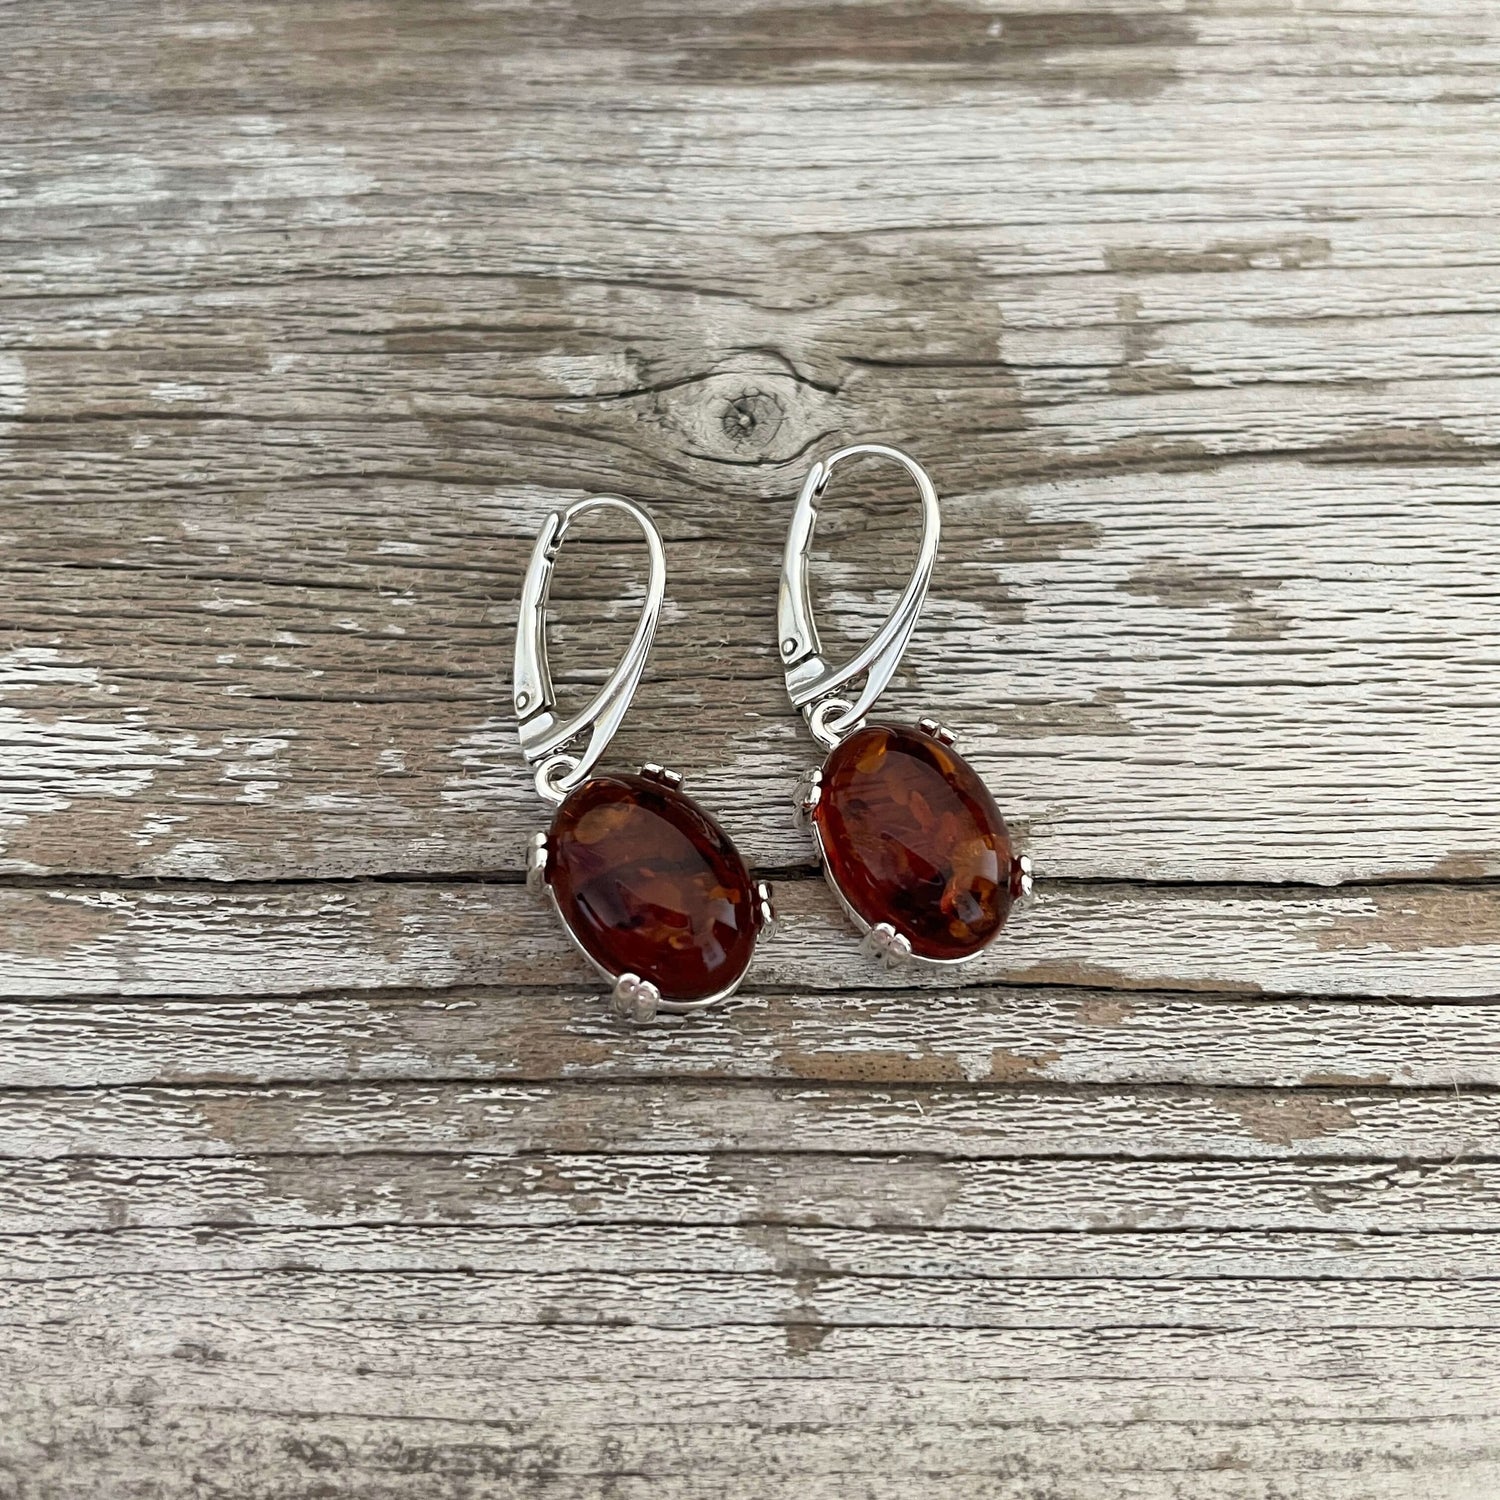 polished amber oval shaped cognac coloured drop earrings set in sterling silver